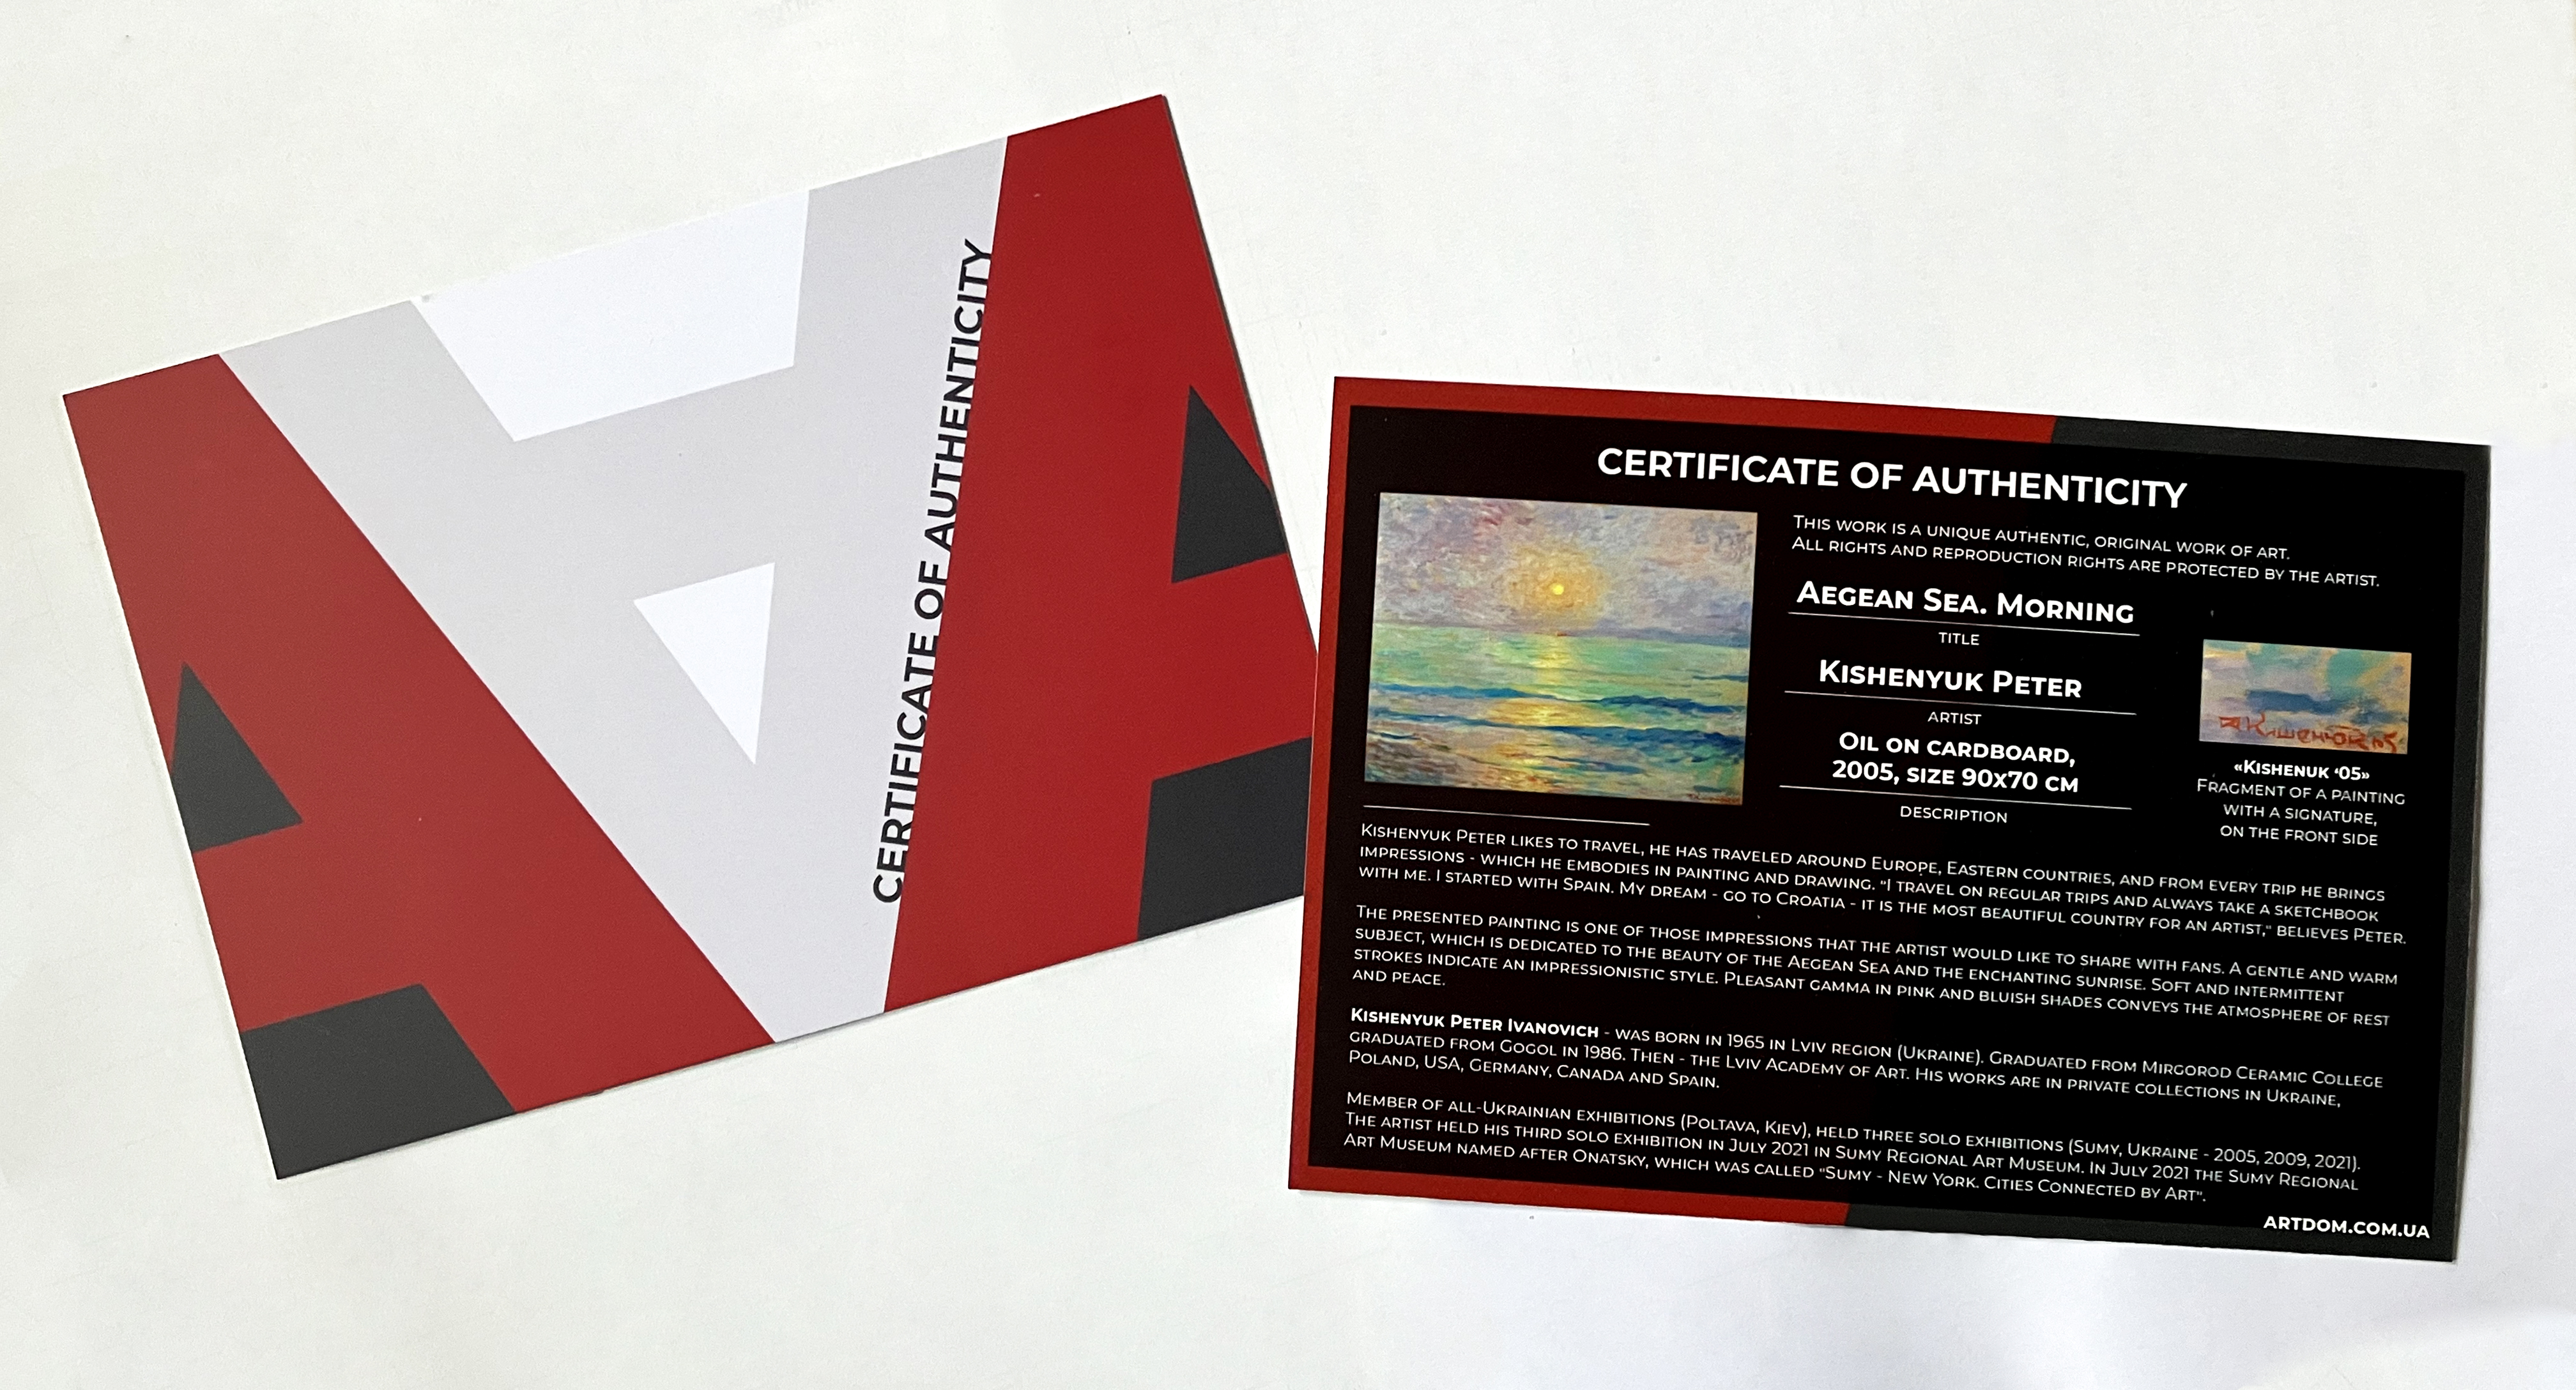 Certificate of authenticity for the painting from the gallery